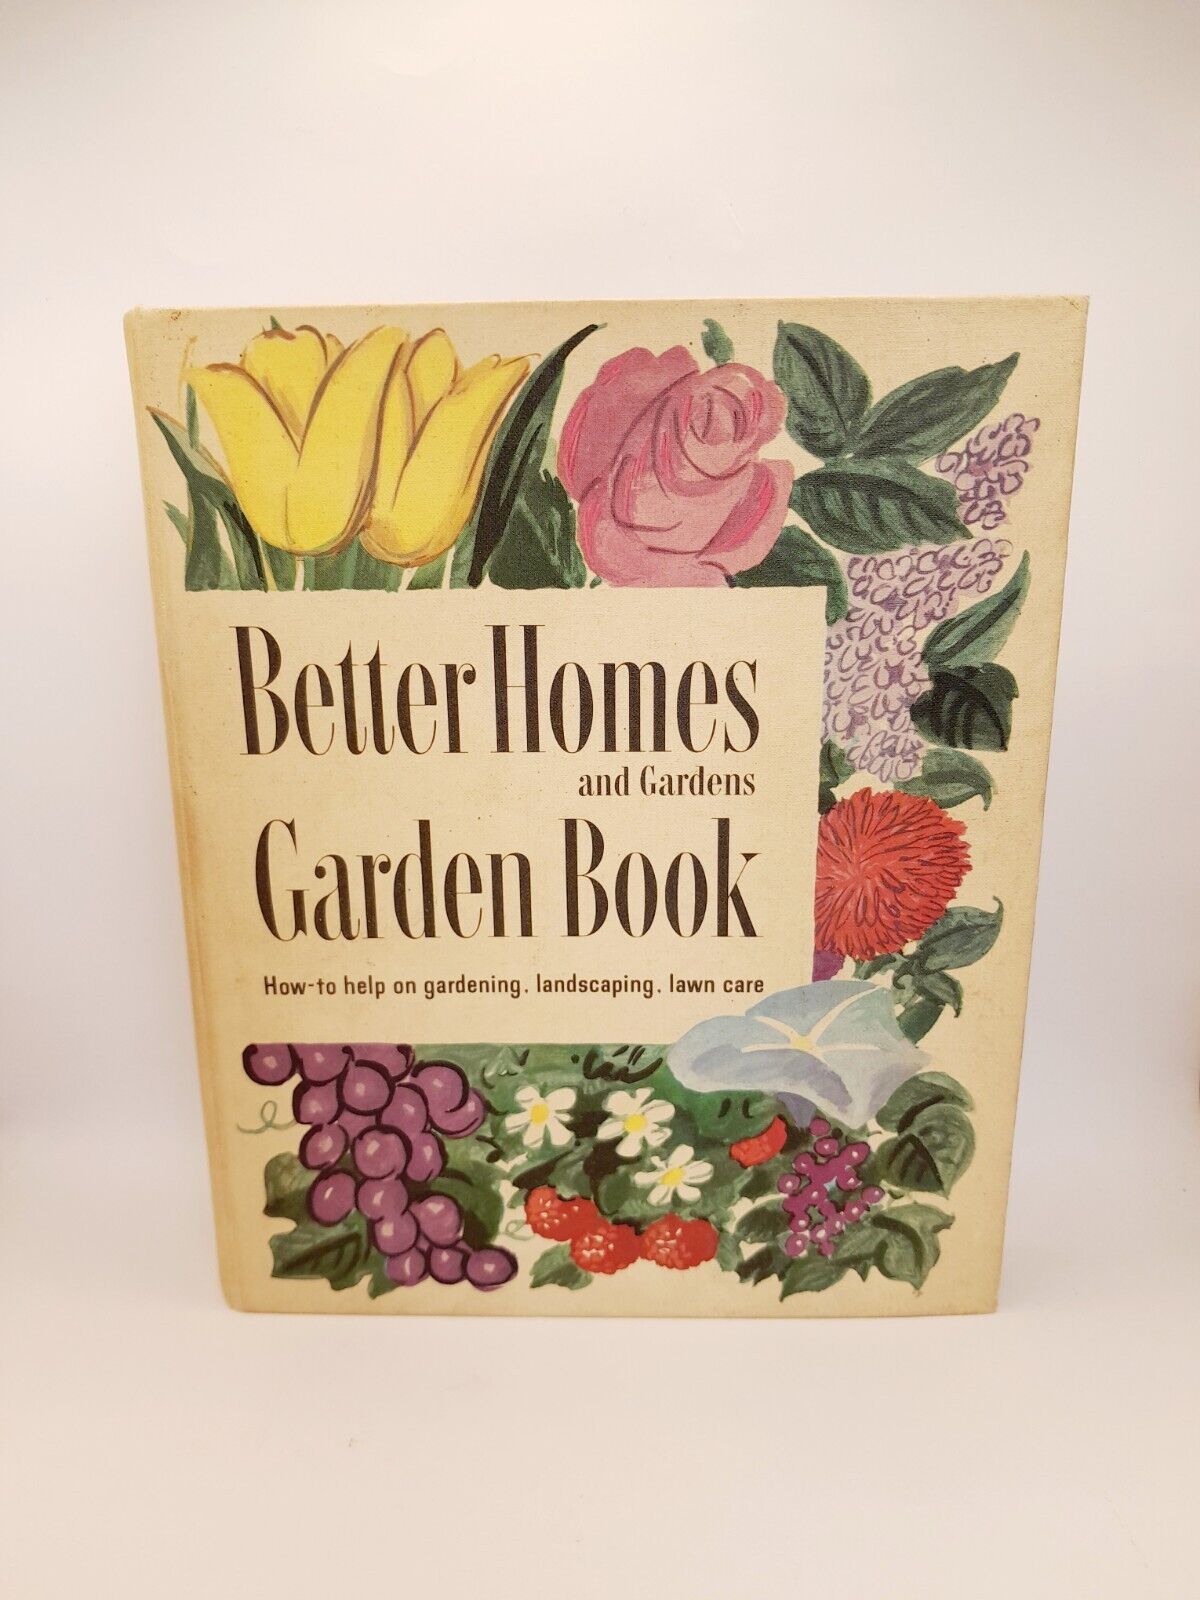 Vintage 1954 Better Homes and Gardens - Garden Book, Second Edition.